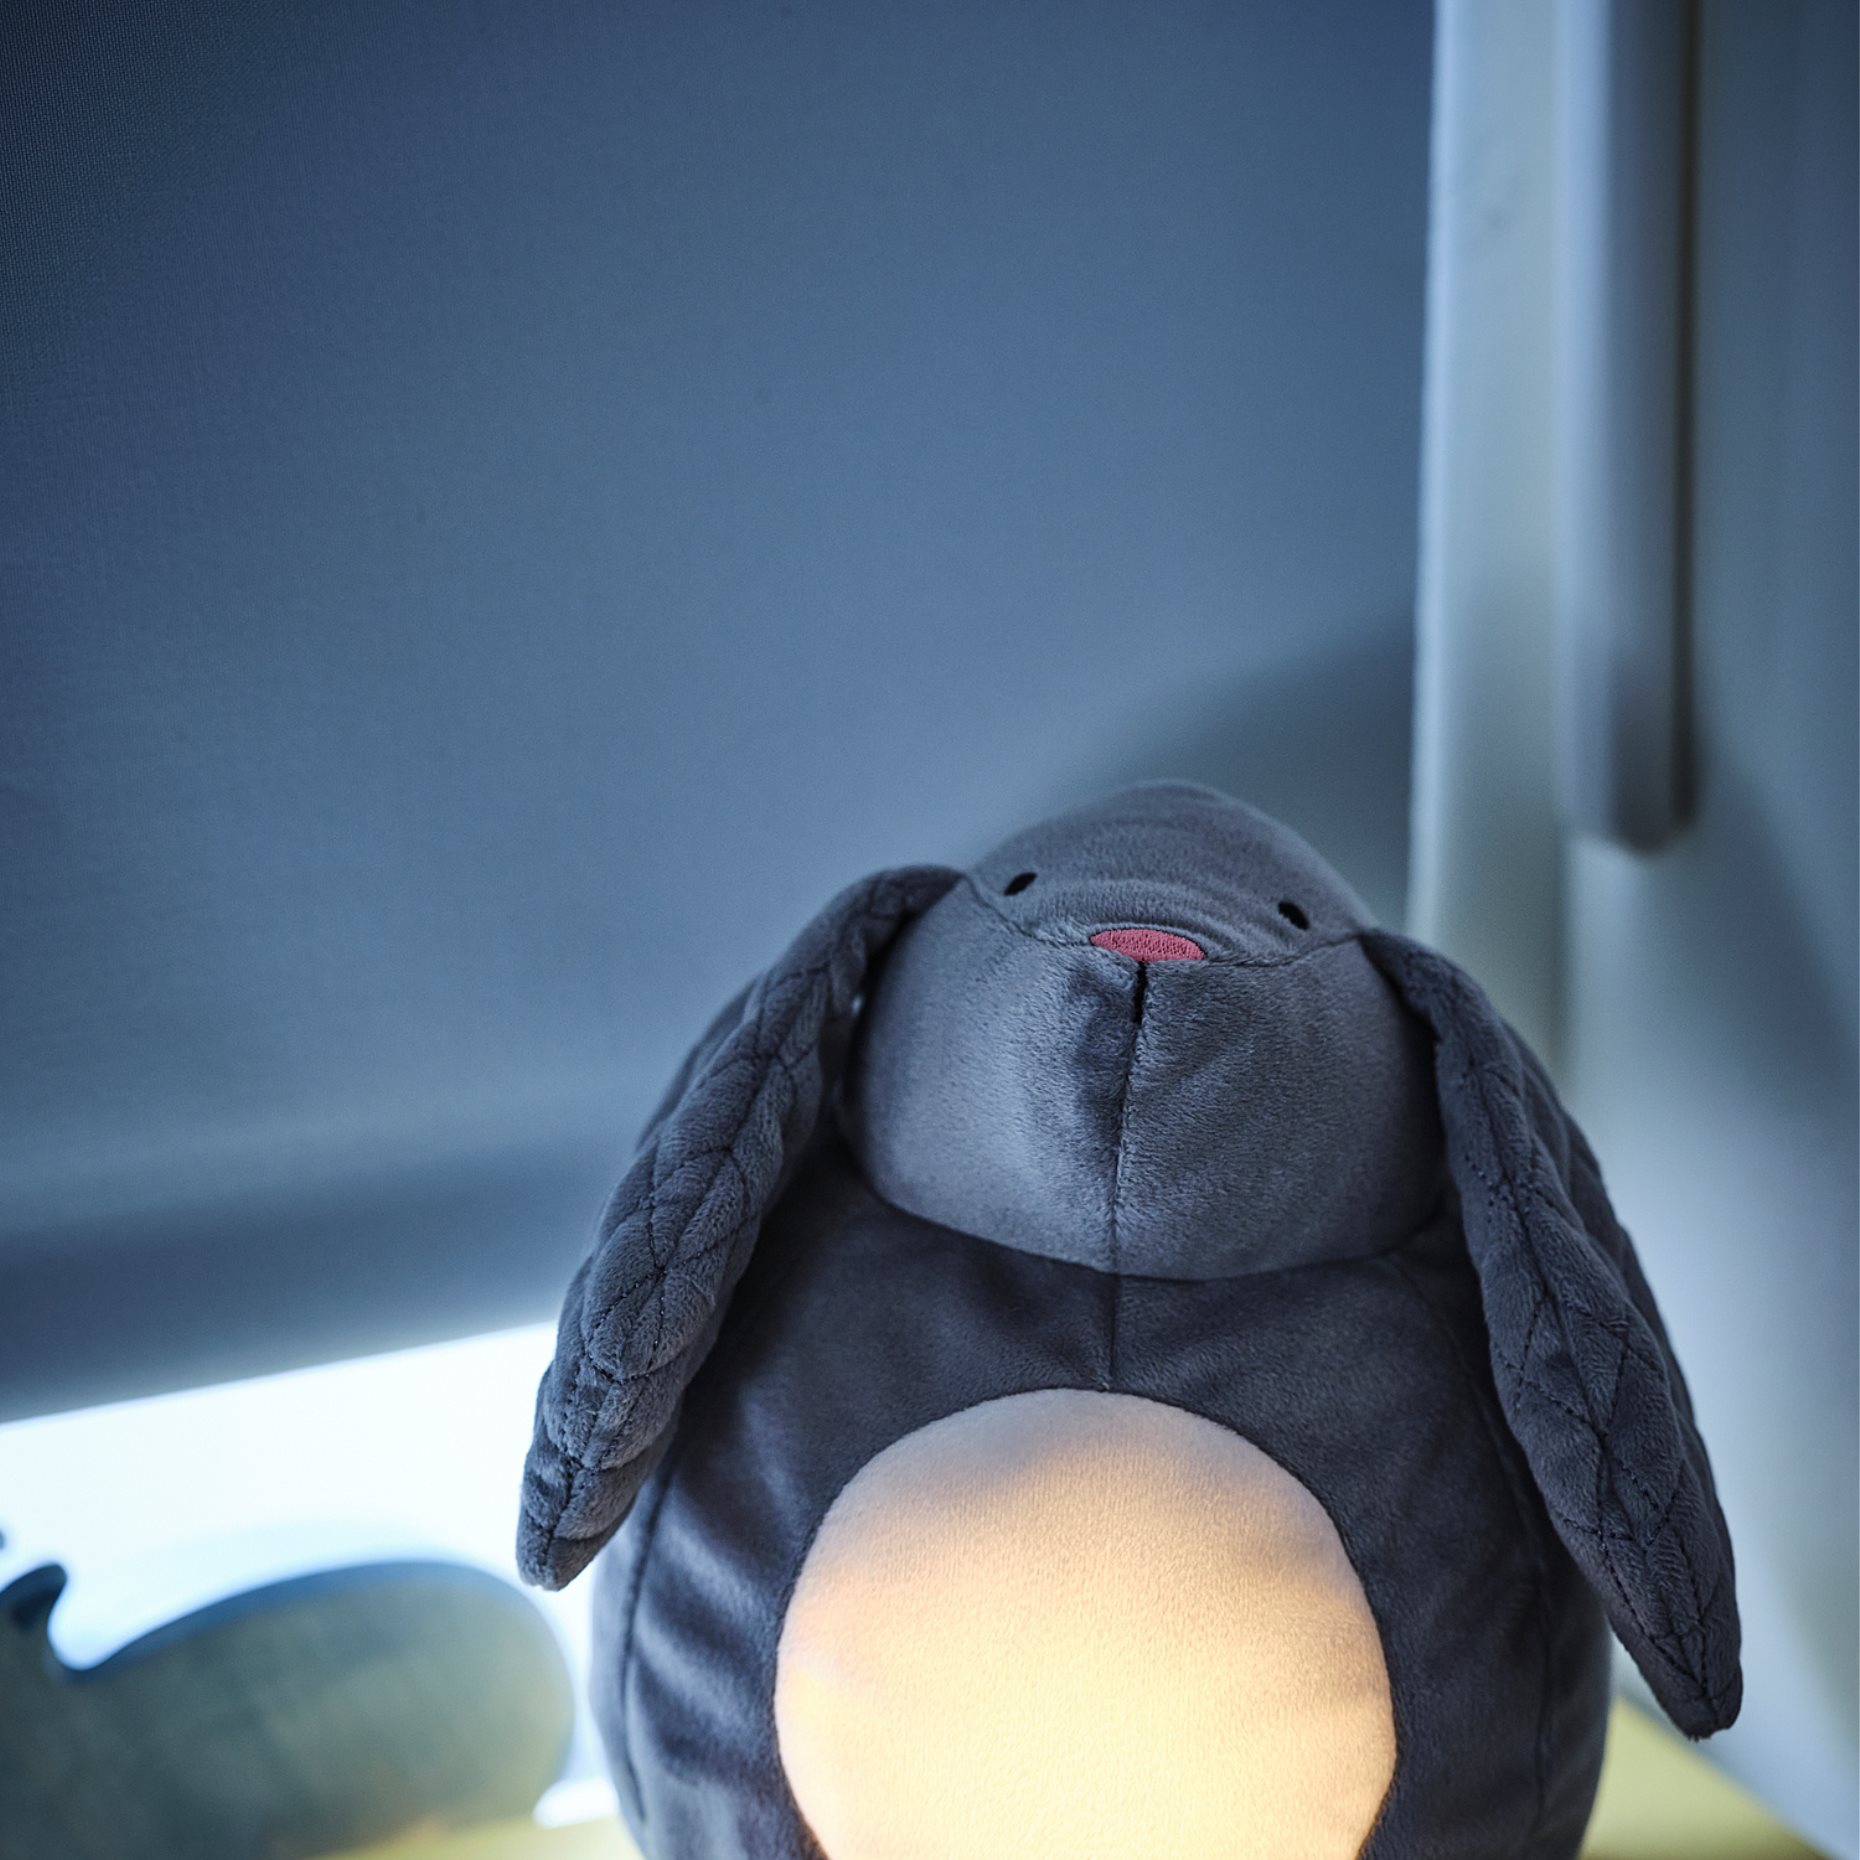 PEKHULT, soft toy with night light and built-in LED light source/ battery-operated, 19 cm, 504.700.03